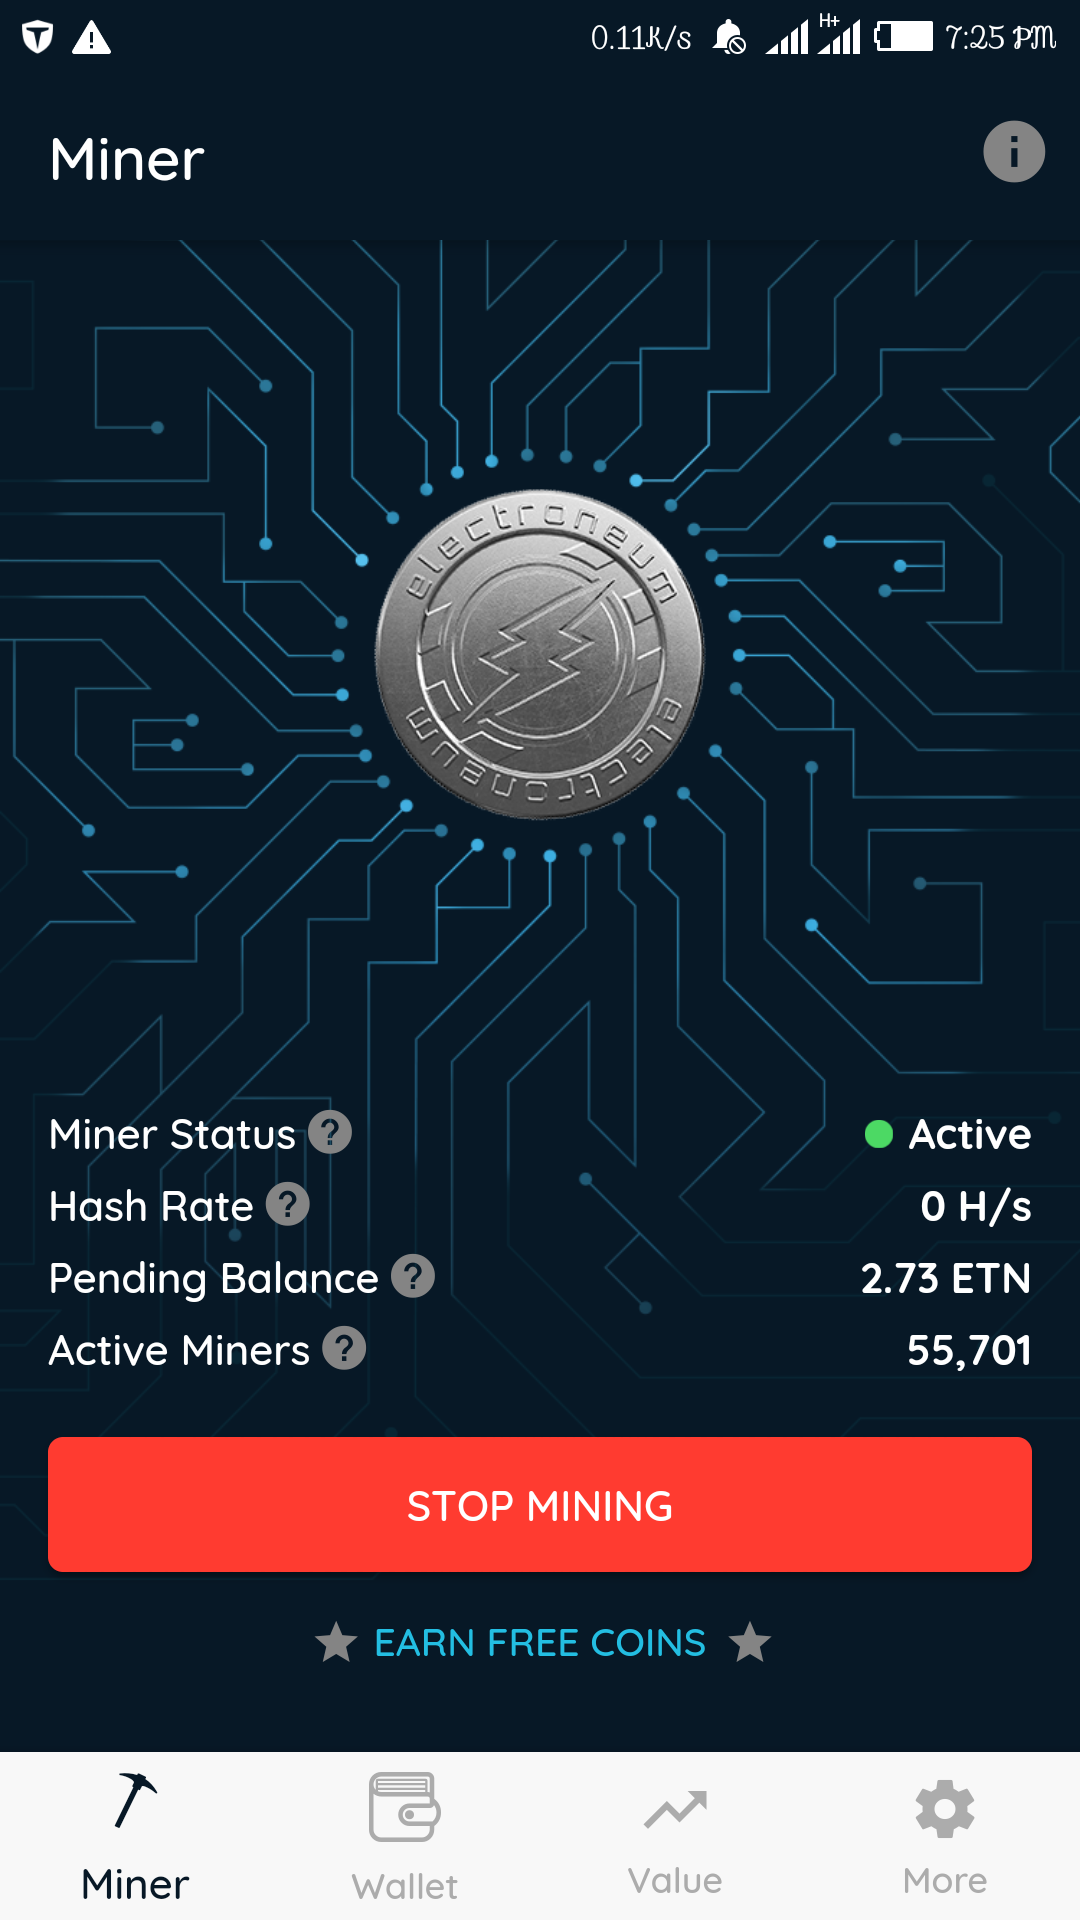 Electroneum App for Android (Wallet & Miner)